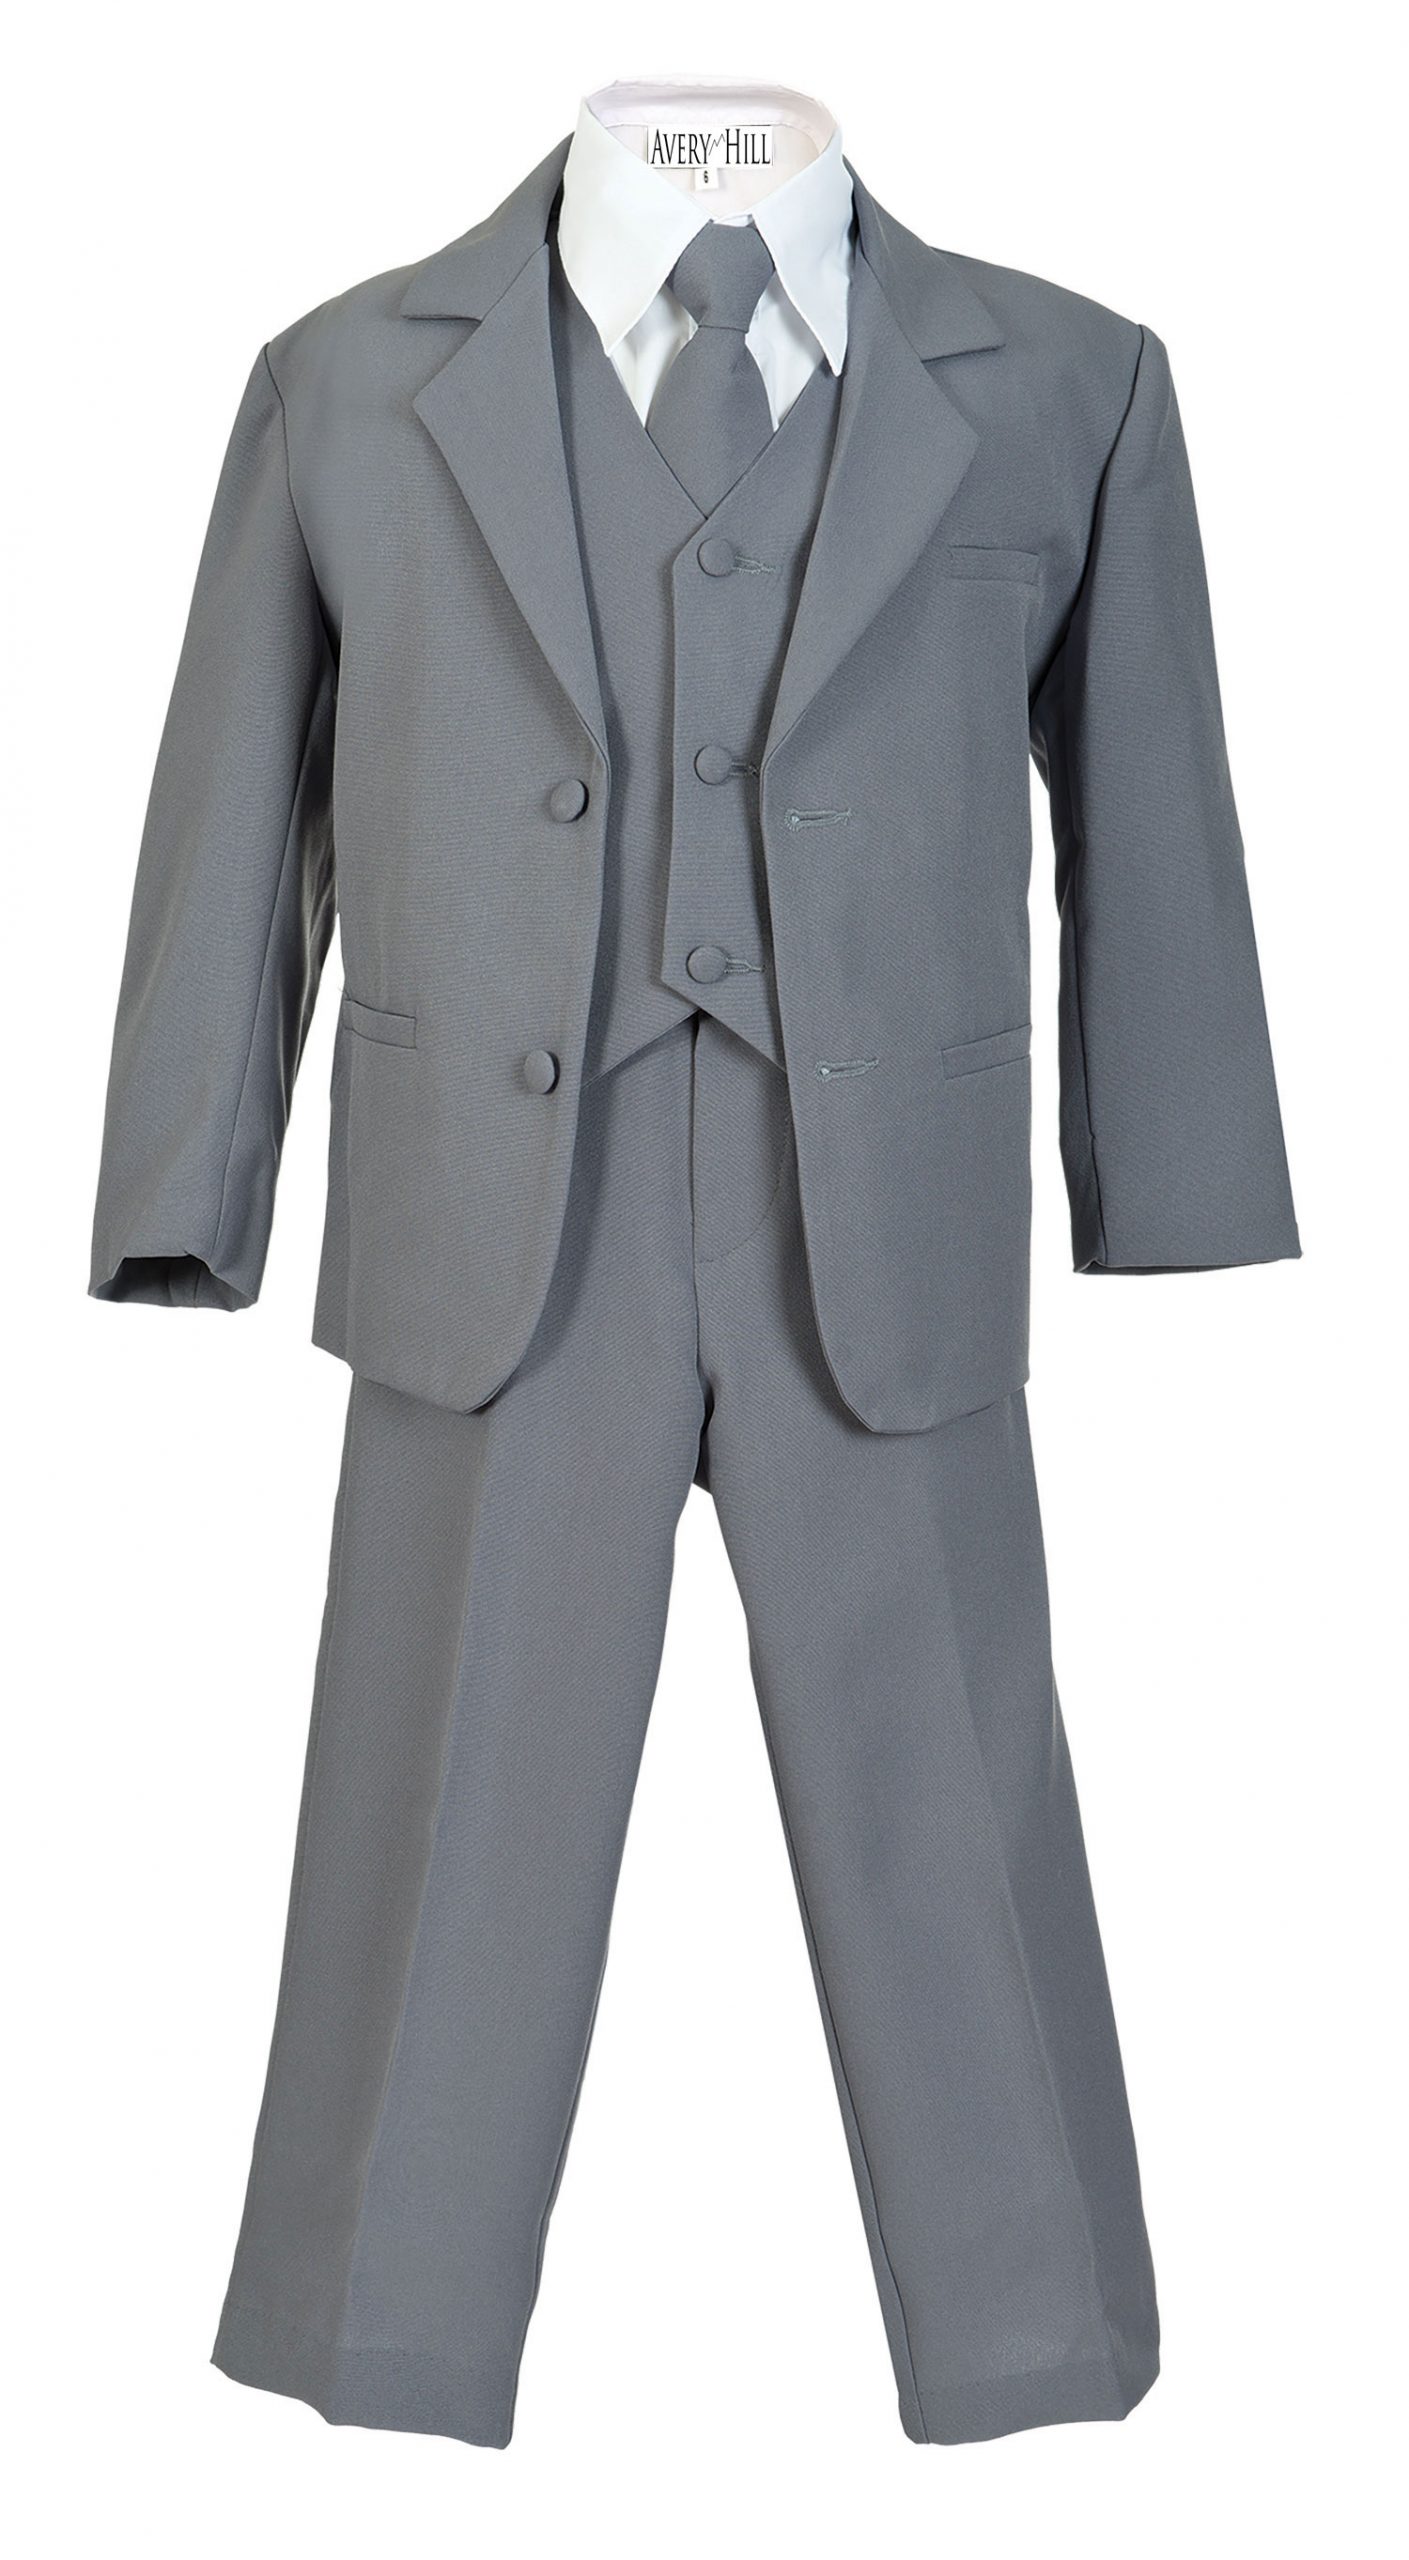 Avery Hill Boys Formal 5 Piece Suit with Shirt and Vest Slate Gray - 6